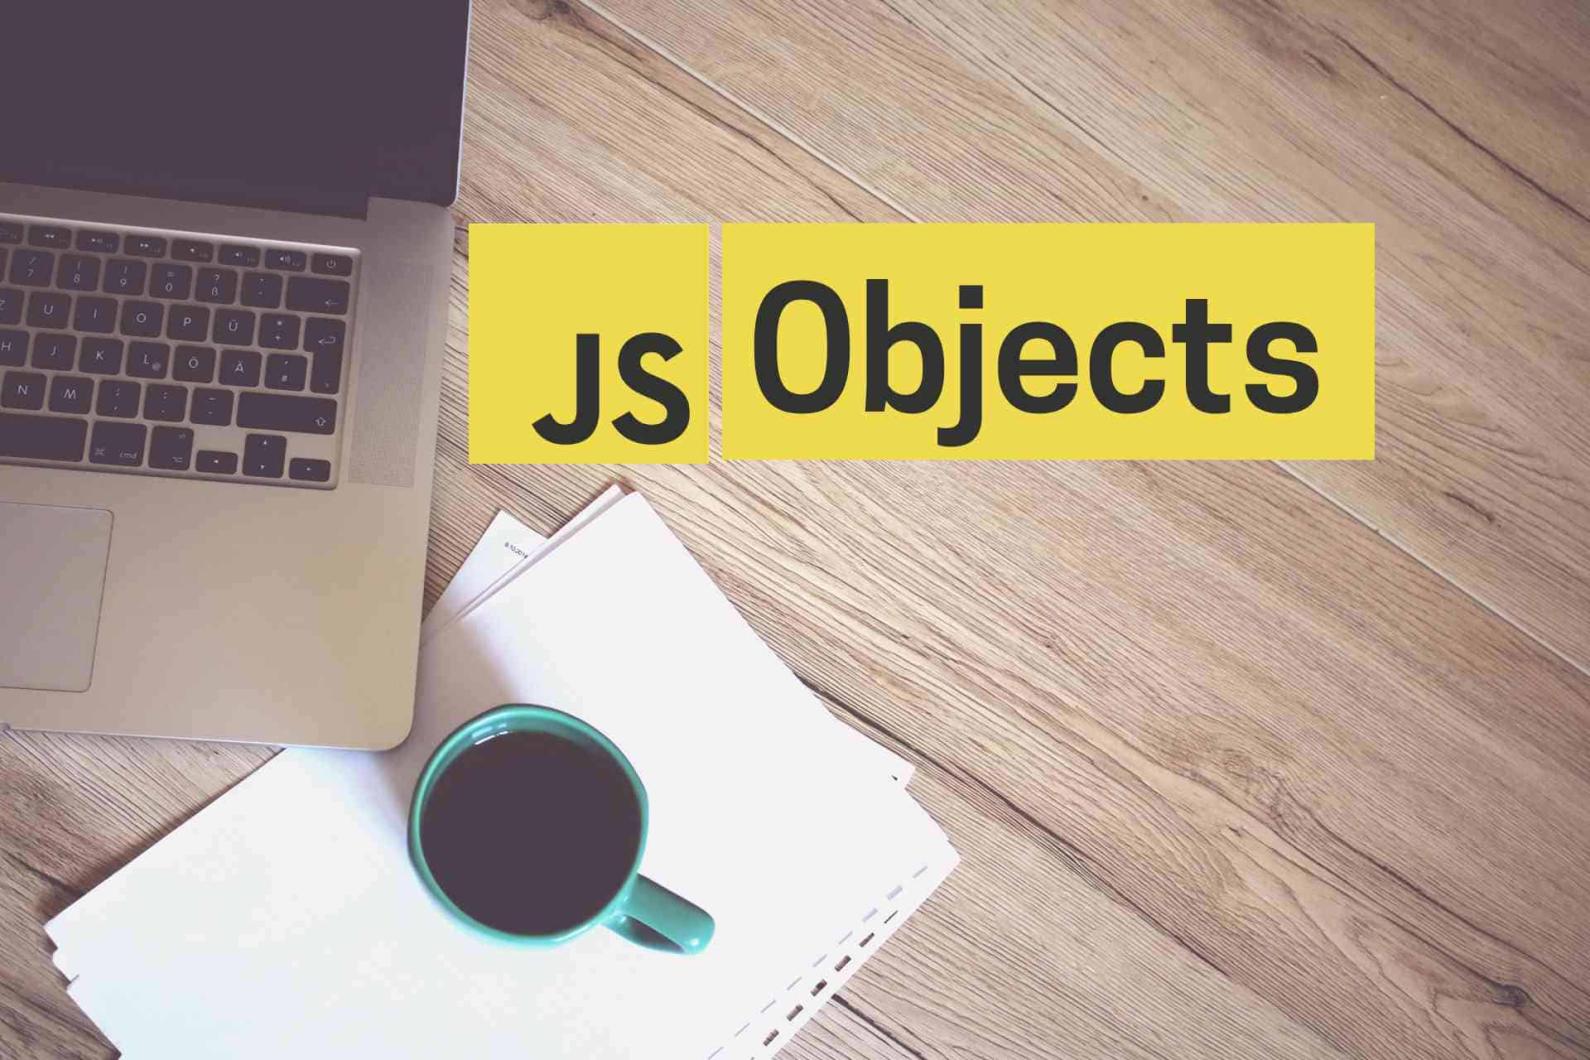 How Can JavaScript Objects Help Me Organize My Code?